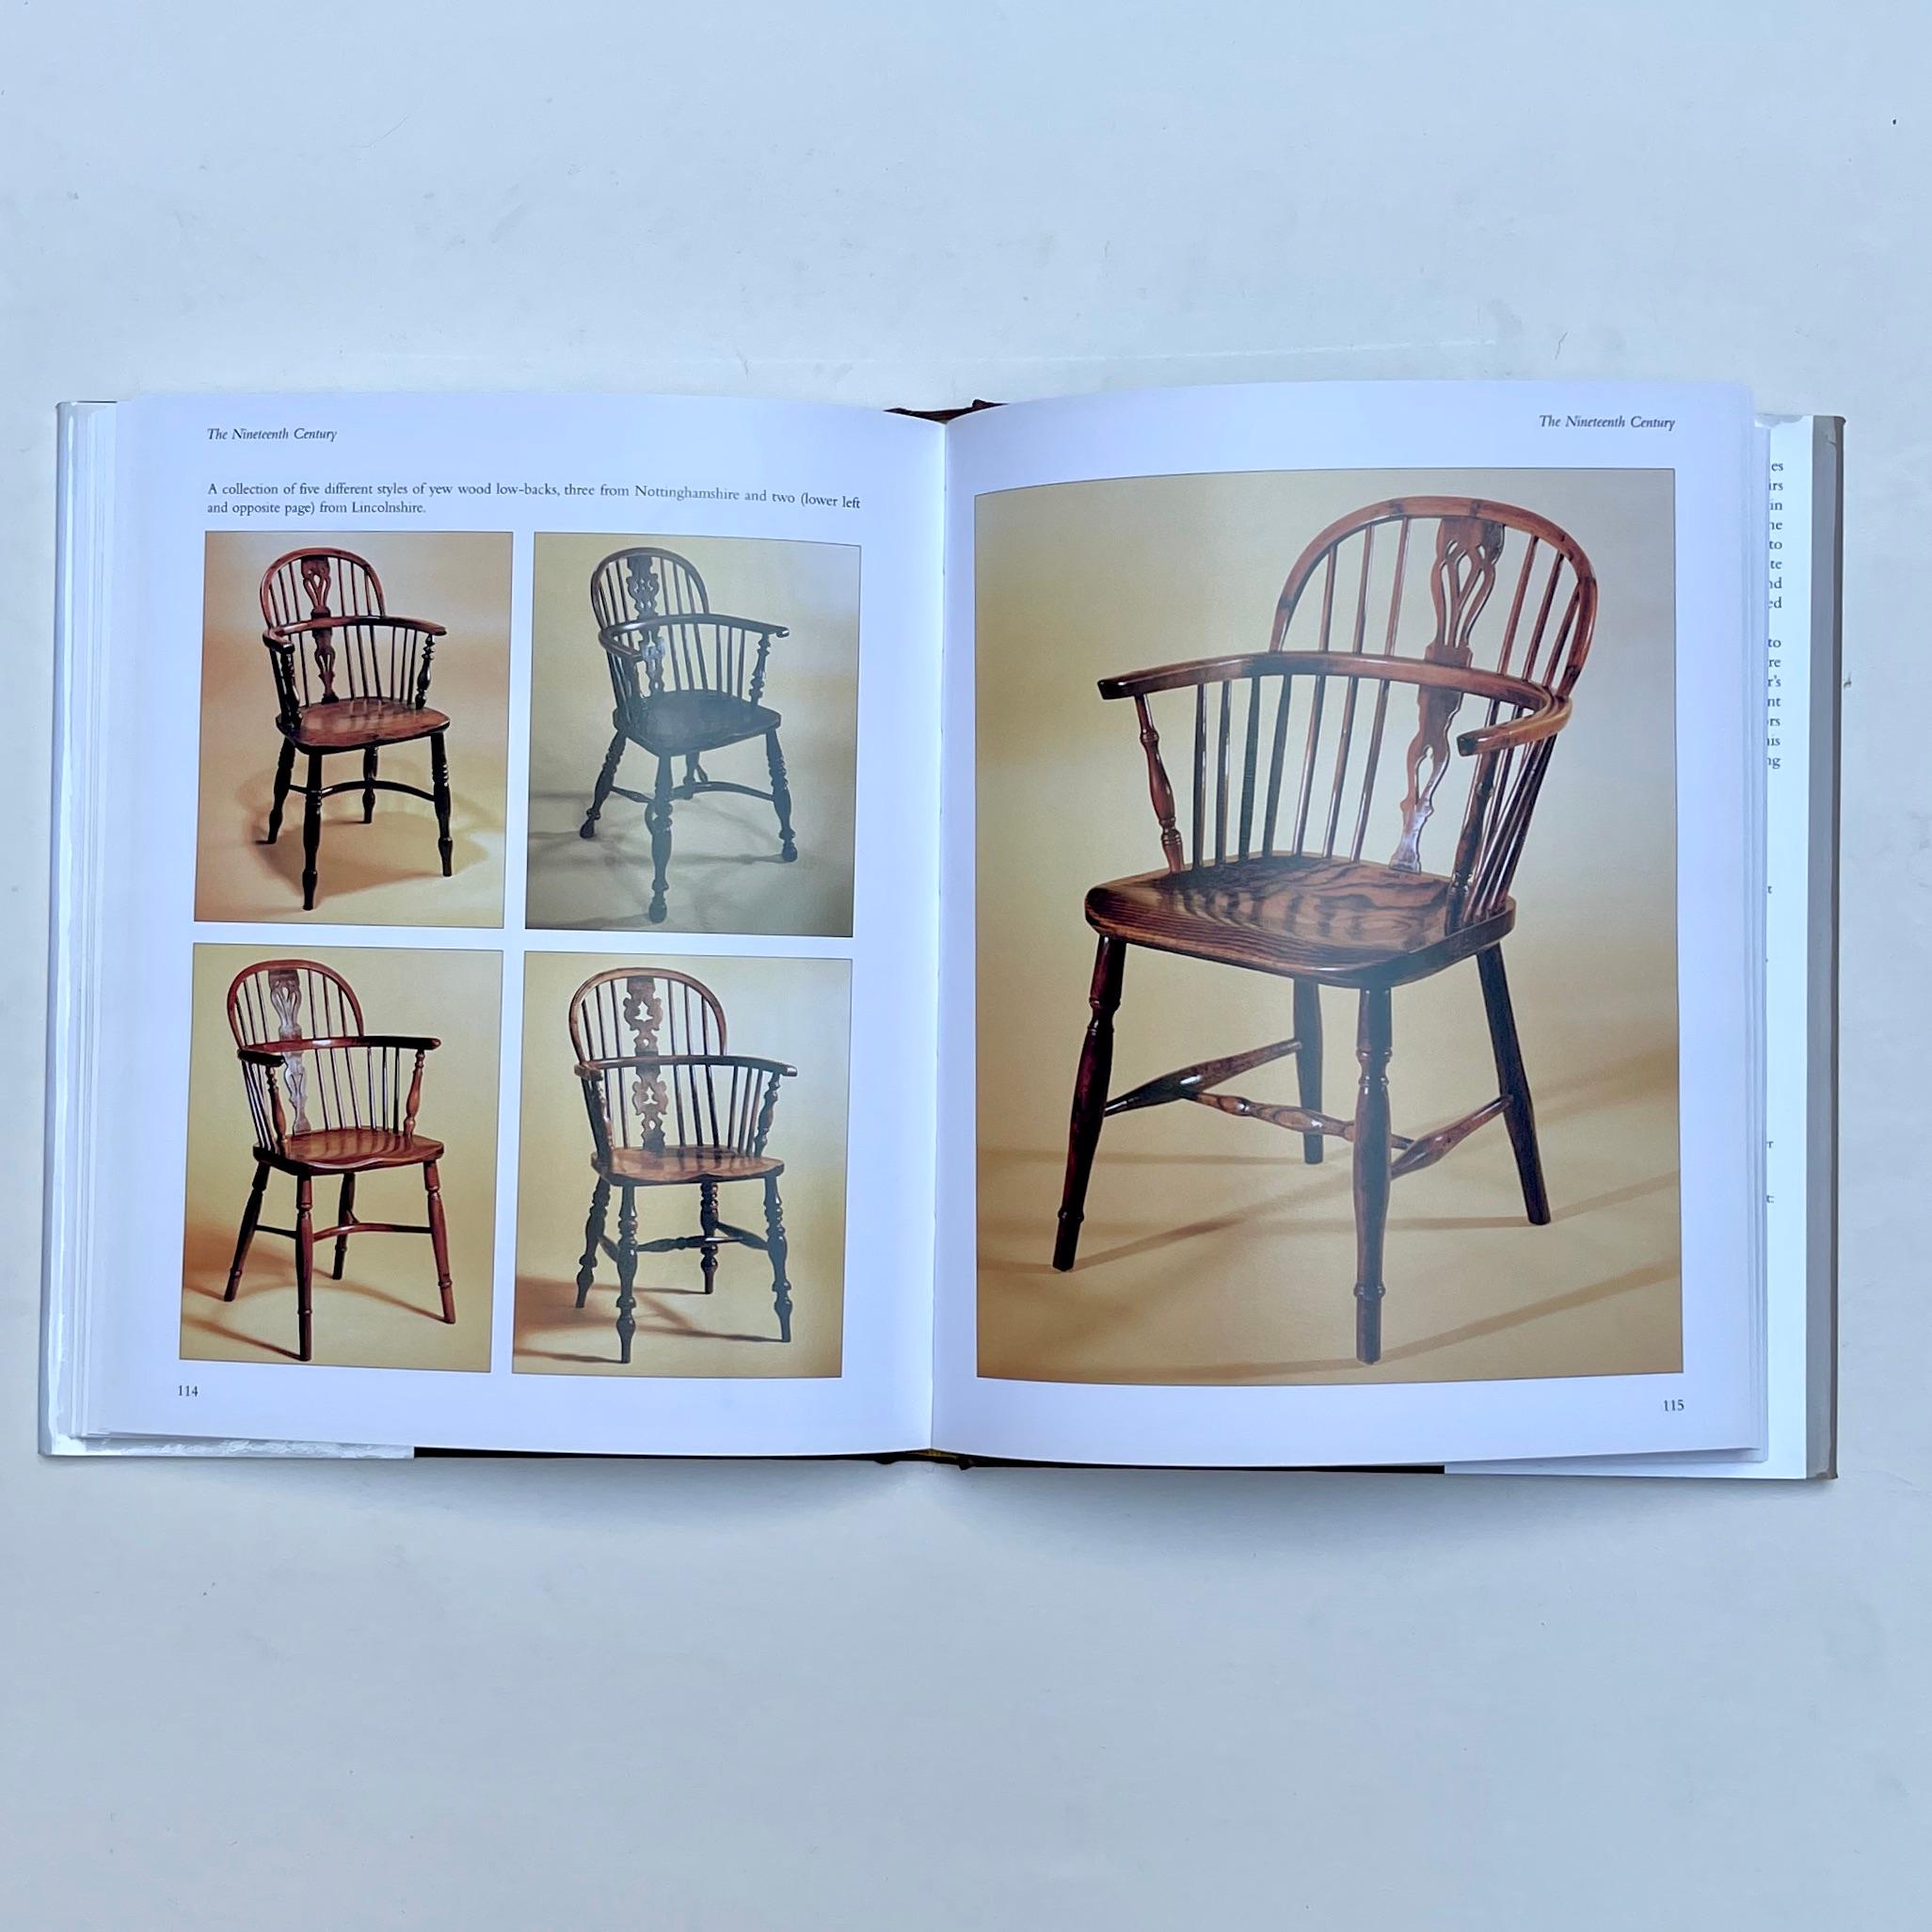 Modern Windsor Chairs, An Illustrated Celebration, Michael Harding-Hill